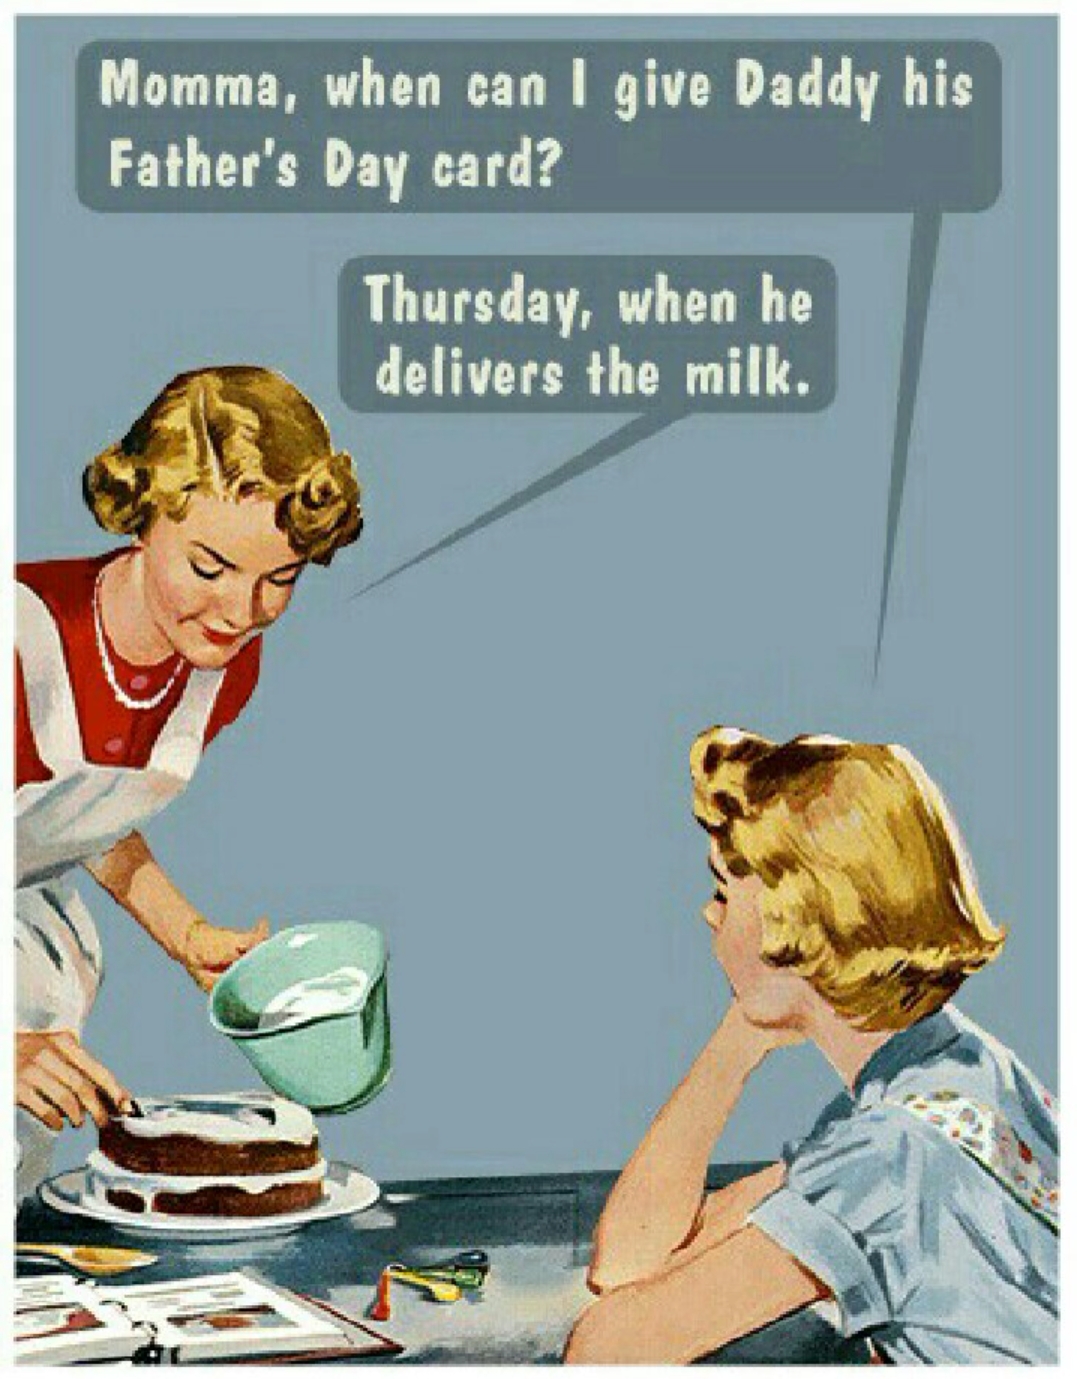 Brutal Father's Day meme of girl asking when she can give dad the card for Father's Day and mom responds that on Thursday when the milkman comes, implying that he is the real father.